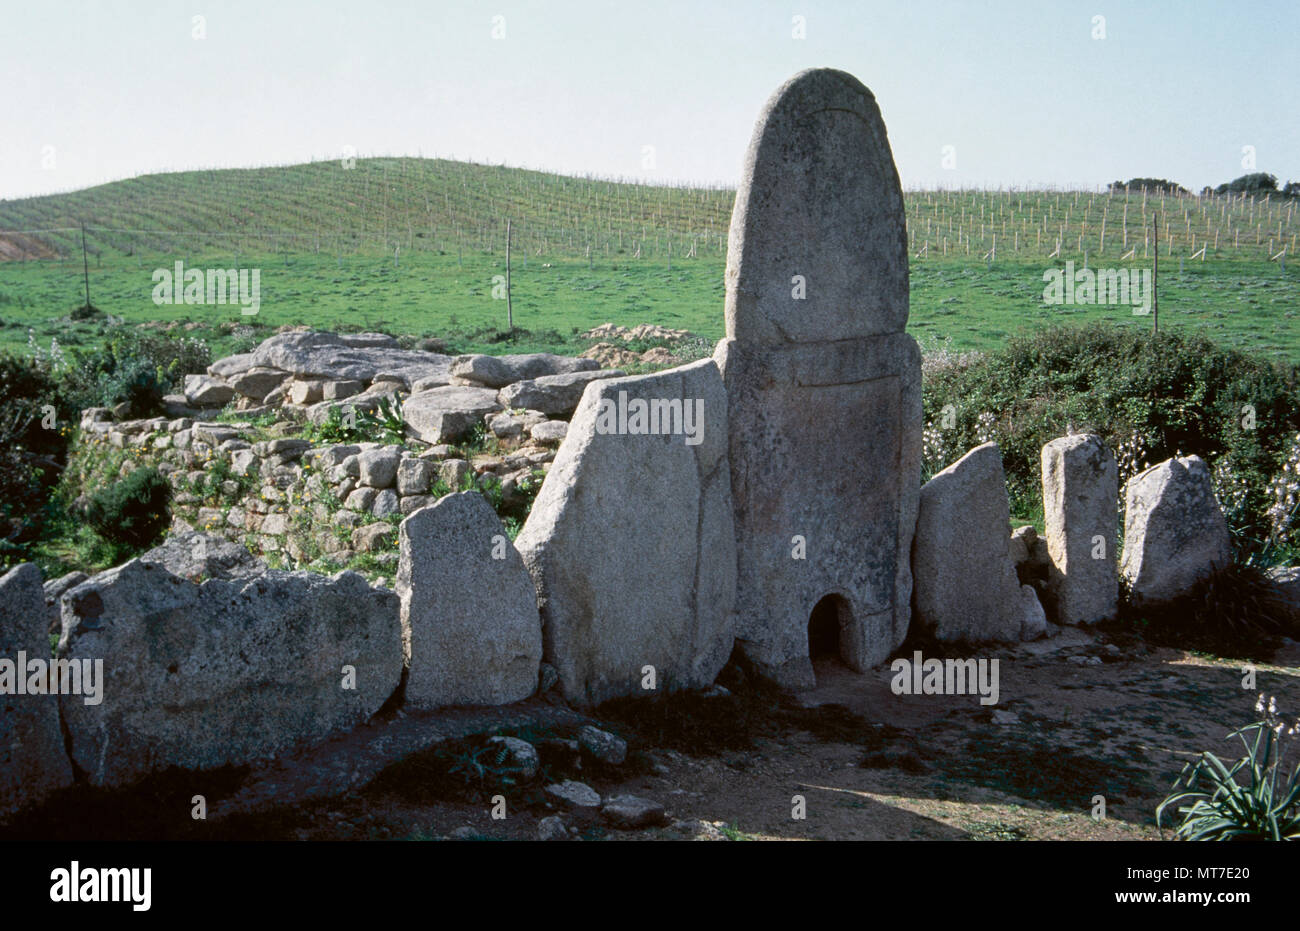 Giants' grave of Coddu Vecchiu. Nuragic funerary monument, near Arzachena. The site constists of a stele, stone megaliths and a gallery grave. Communal grave for notables of the Gens. Sardinia, Italy. Bronze Age. 2500 BC. Stock Photo